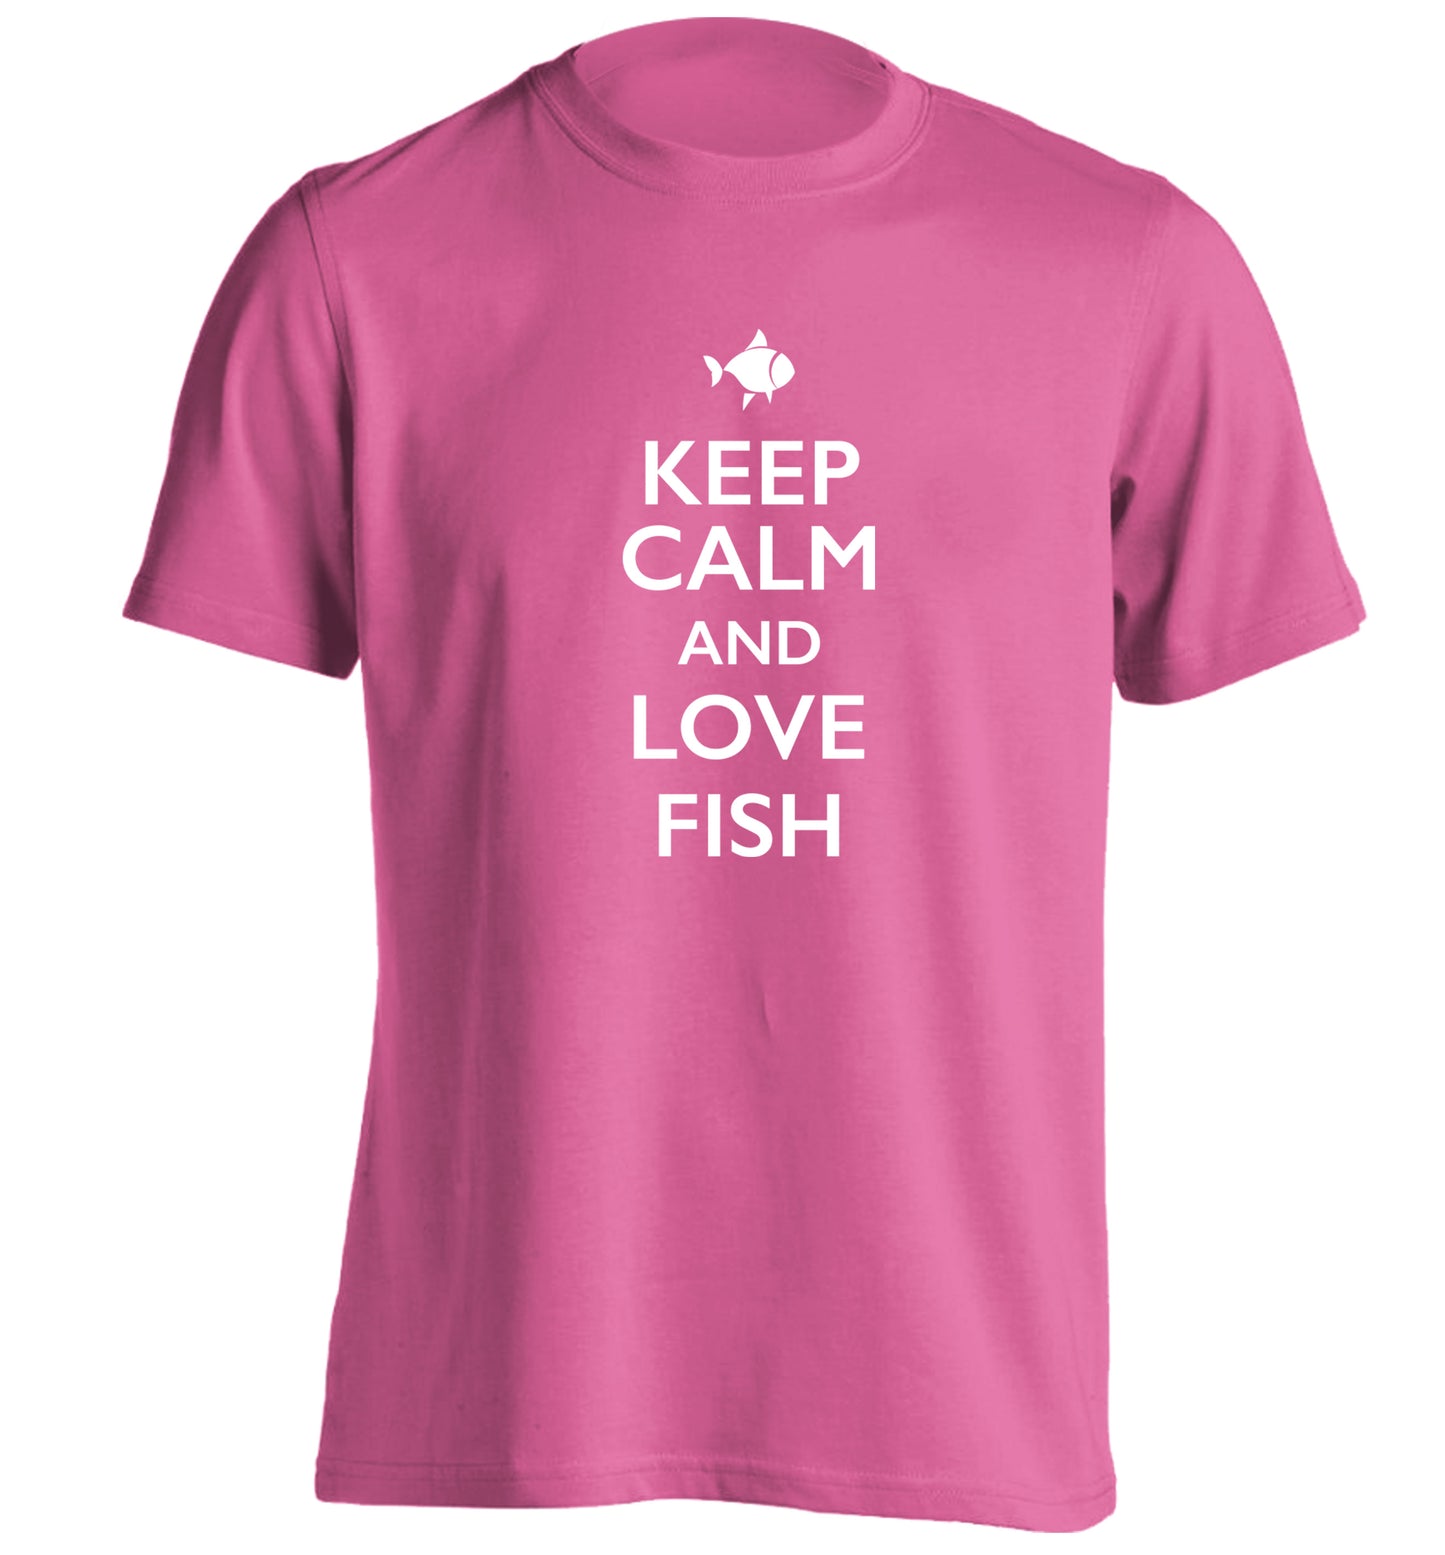 Keep calm and love fish adults unisex pink Tshirt 2XL